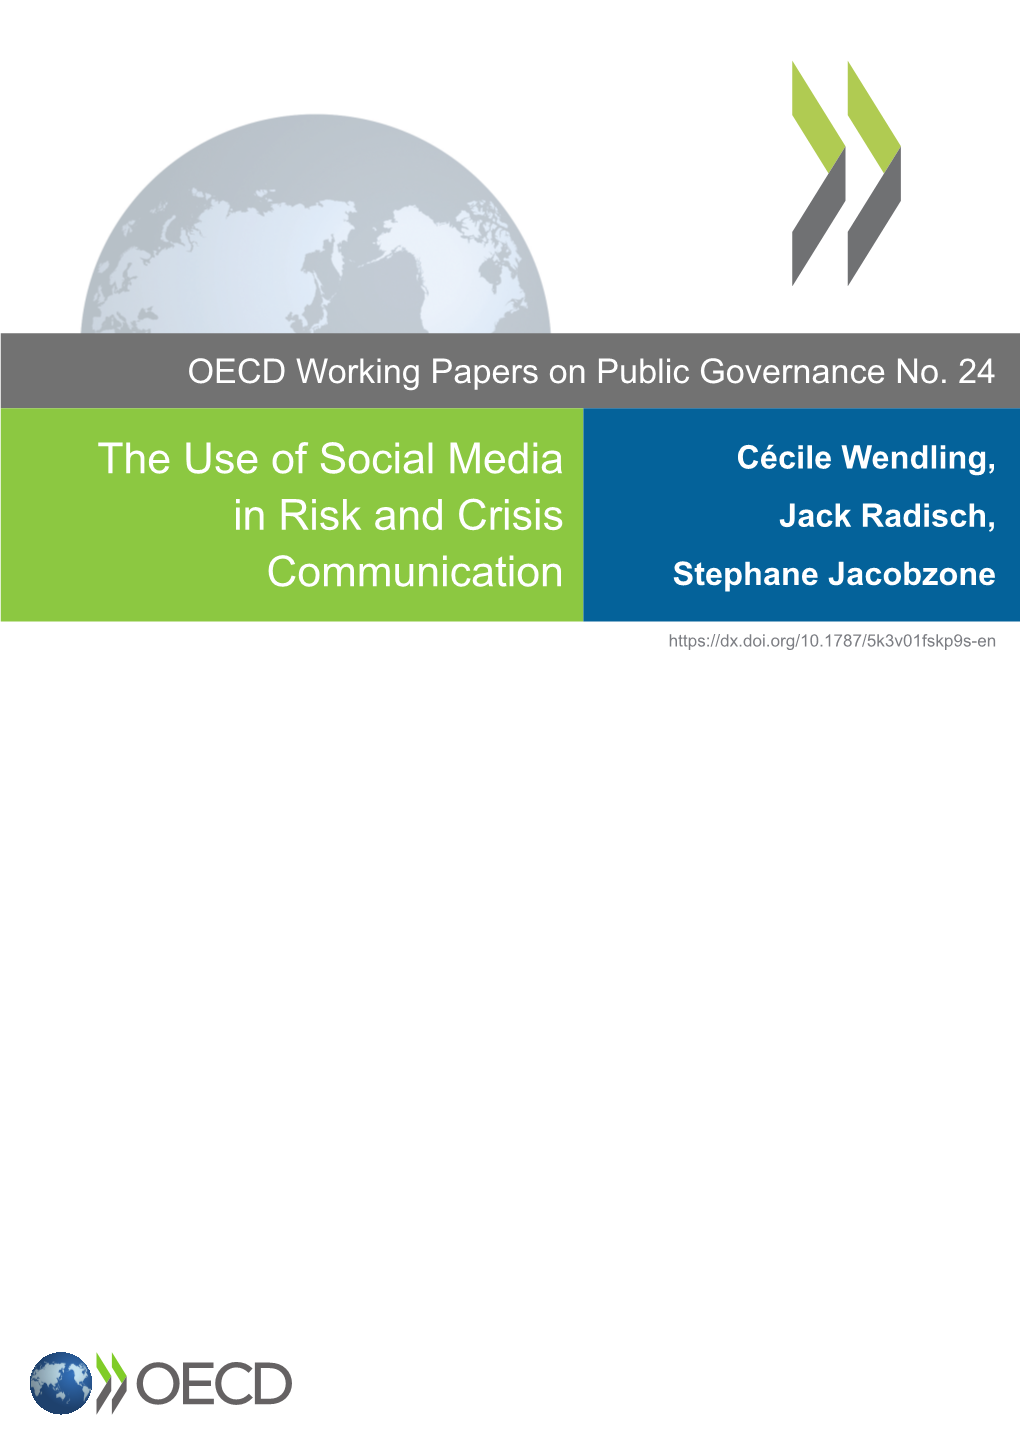 The Use of Social Media in Risk and Crisis Communication”